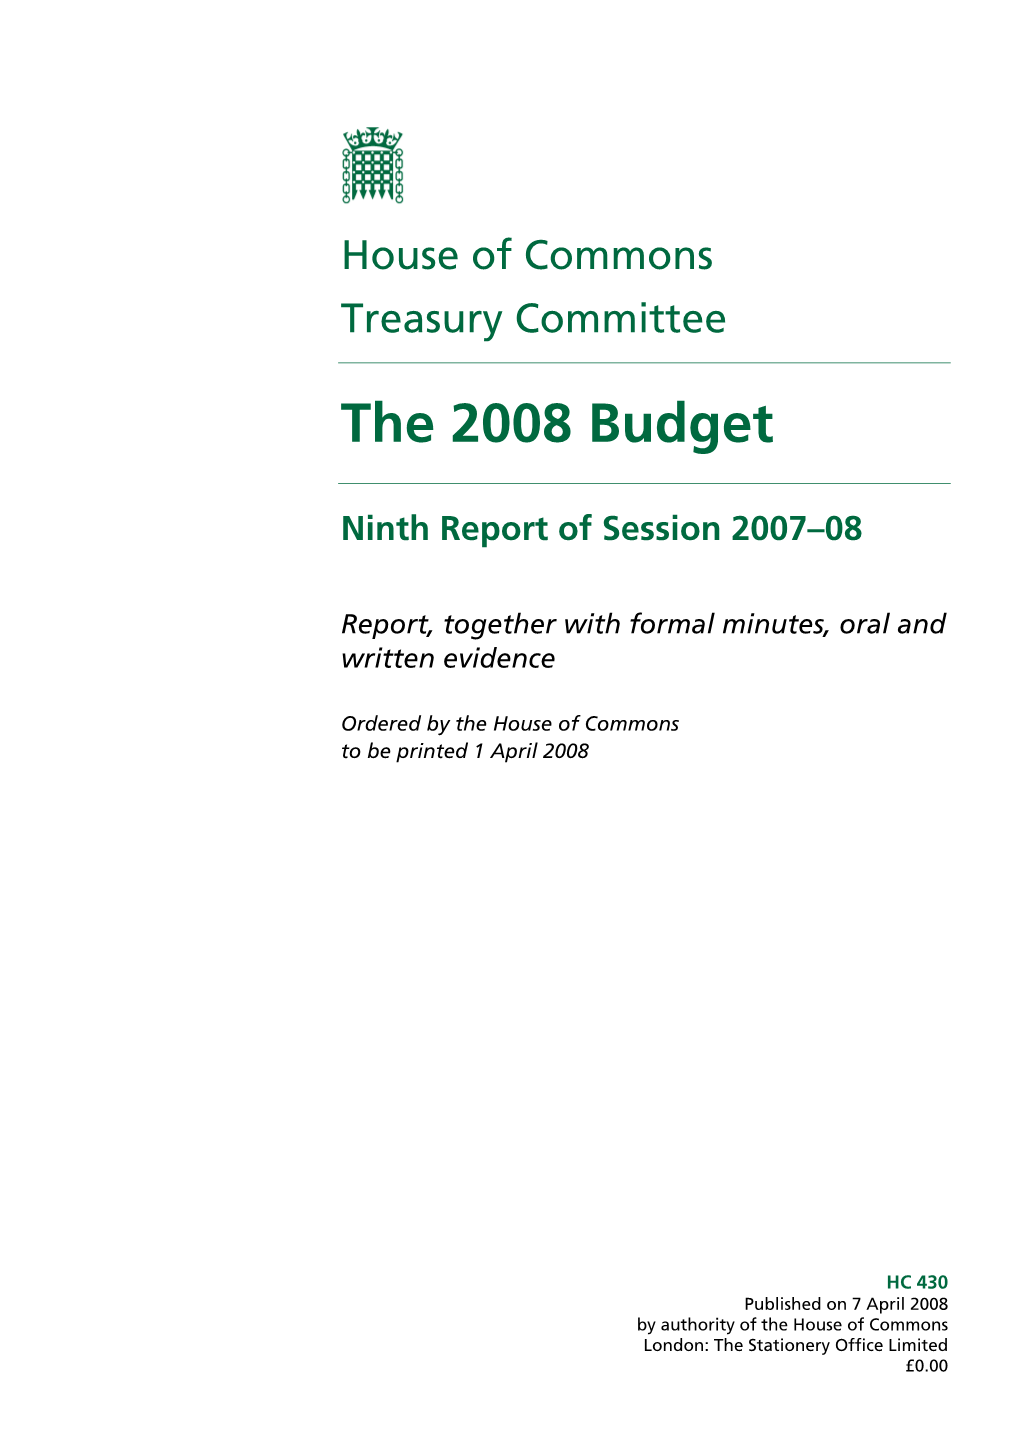 The 2008 Budget